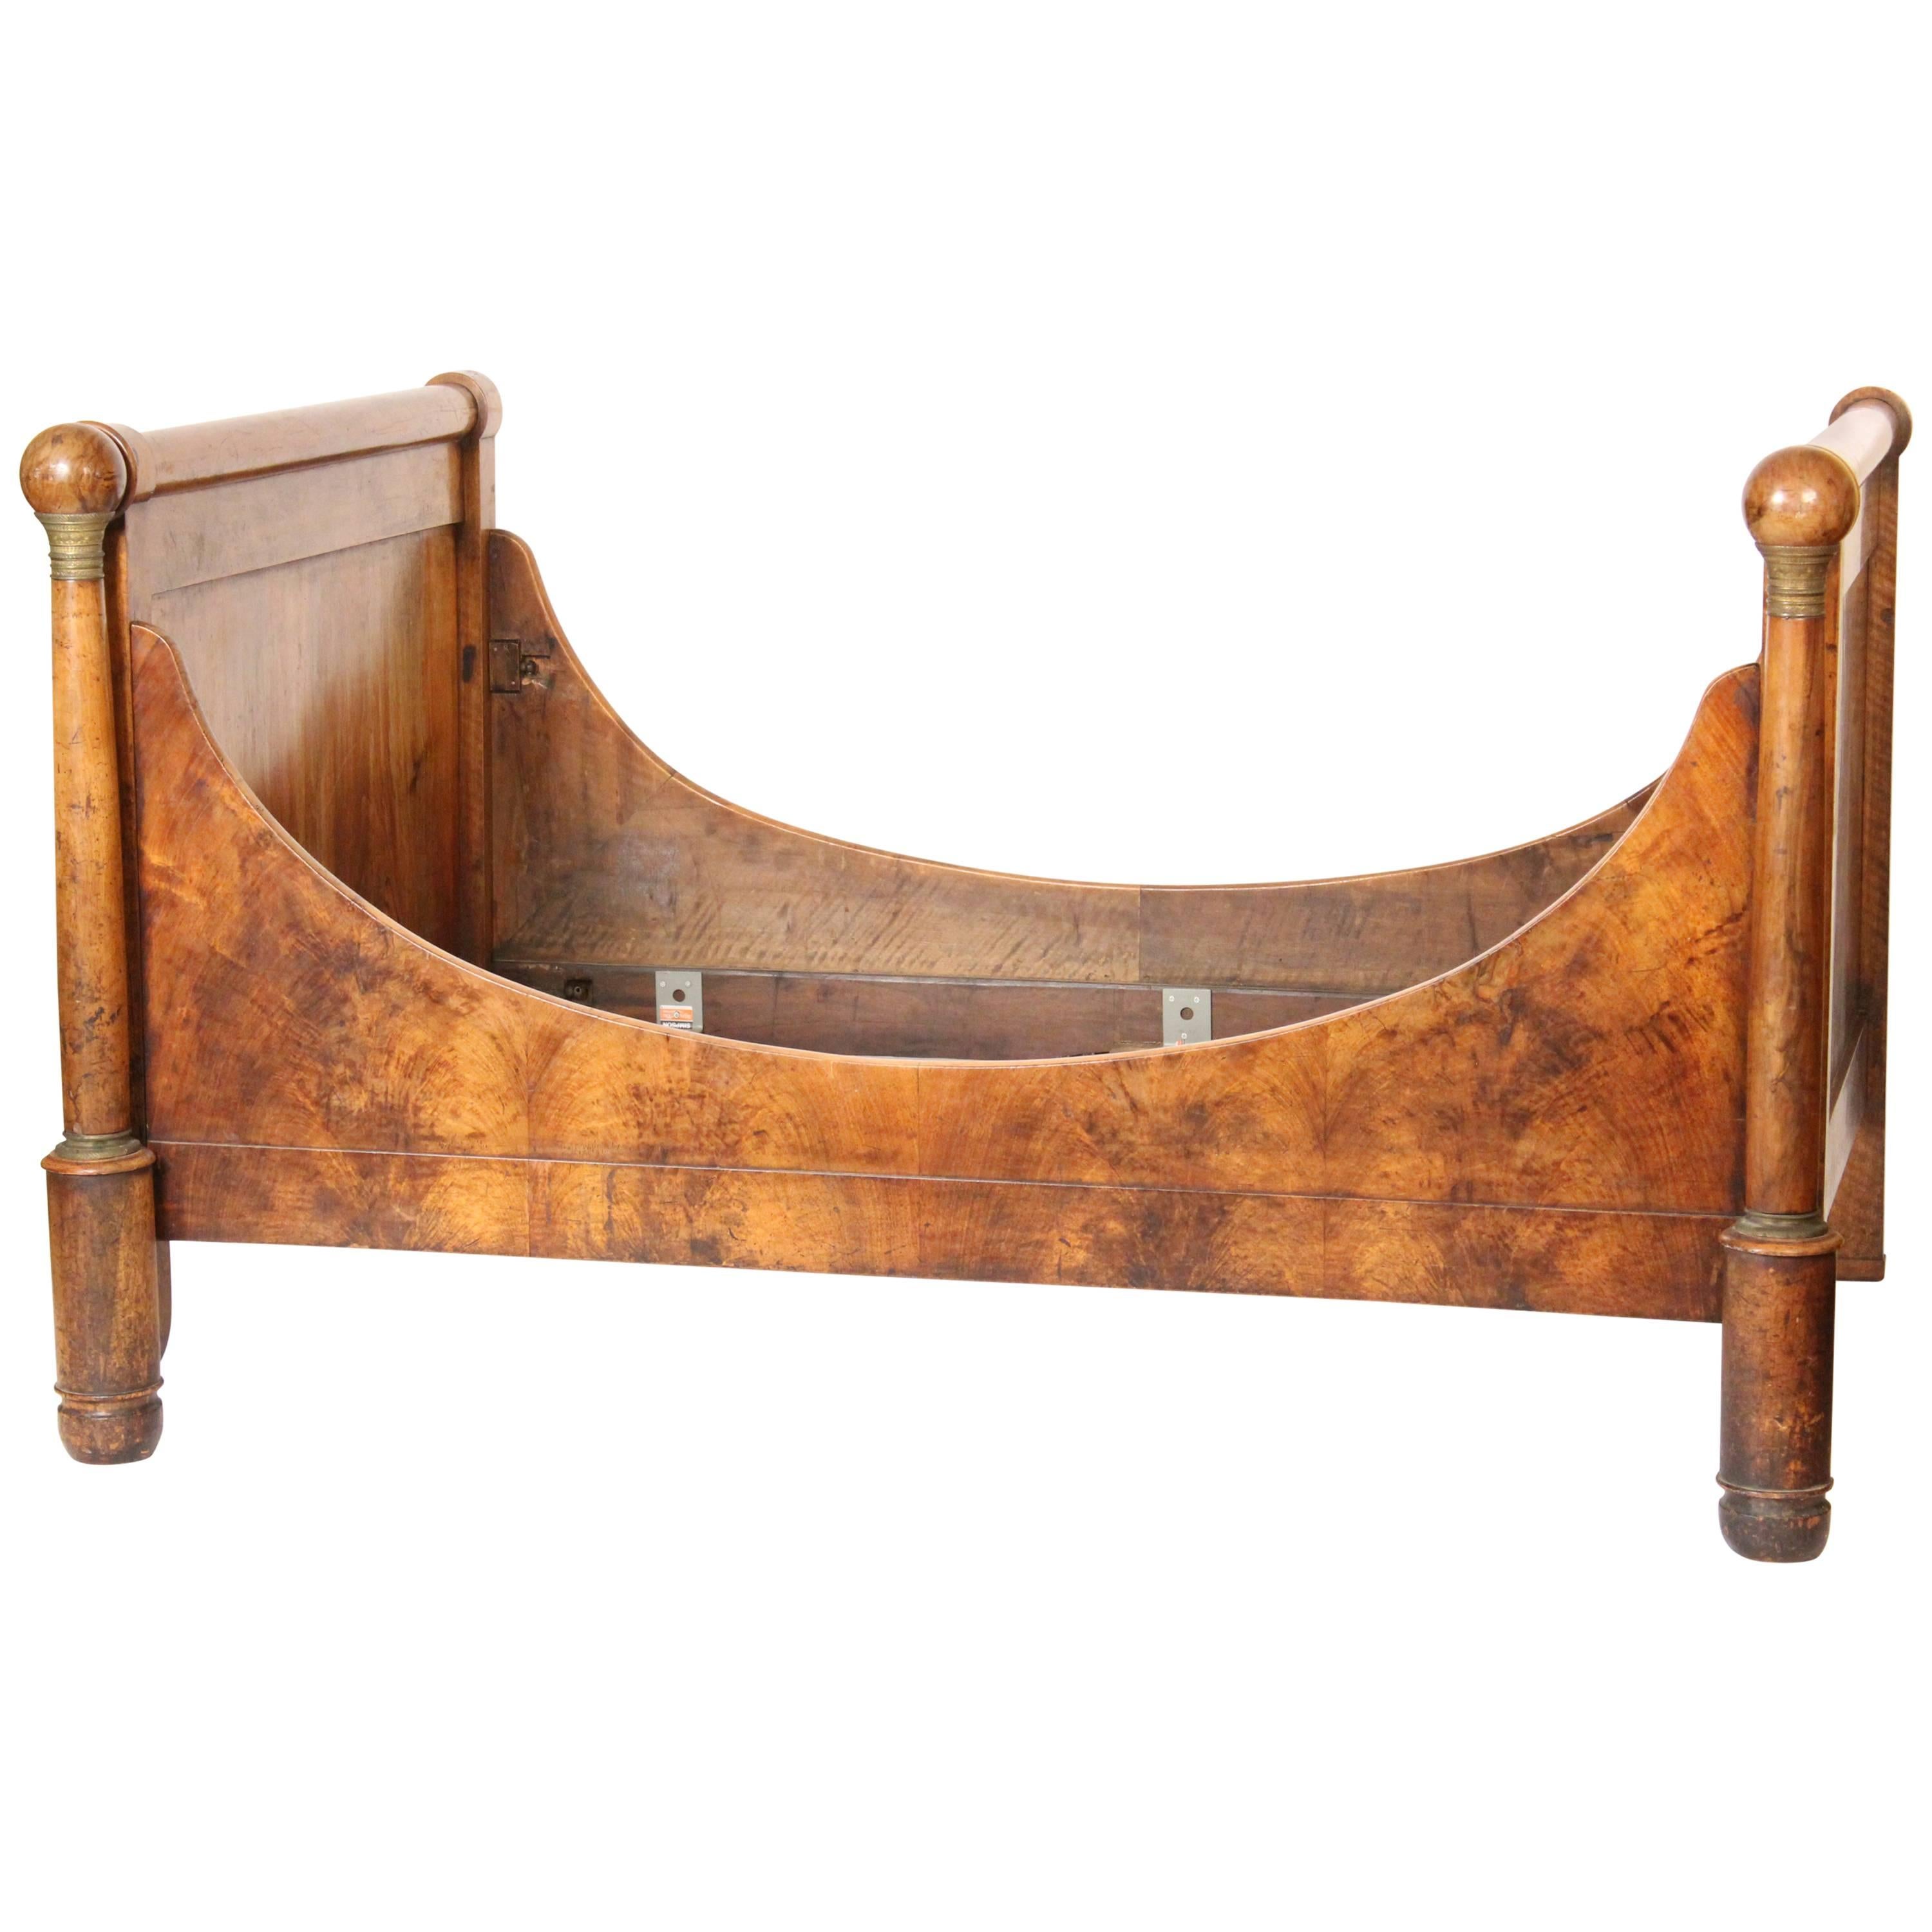 Empire Bronze-Mounted Bed